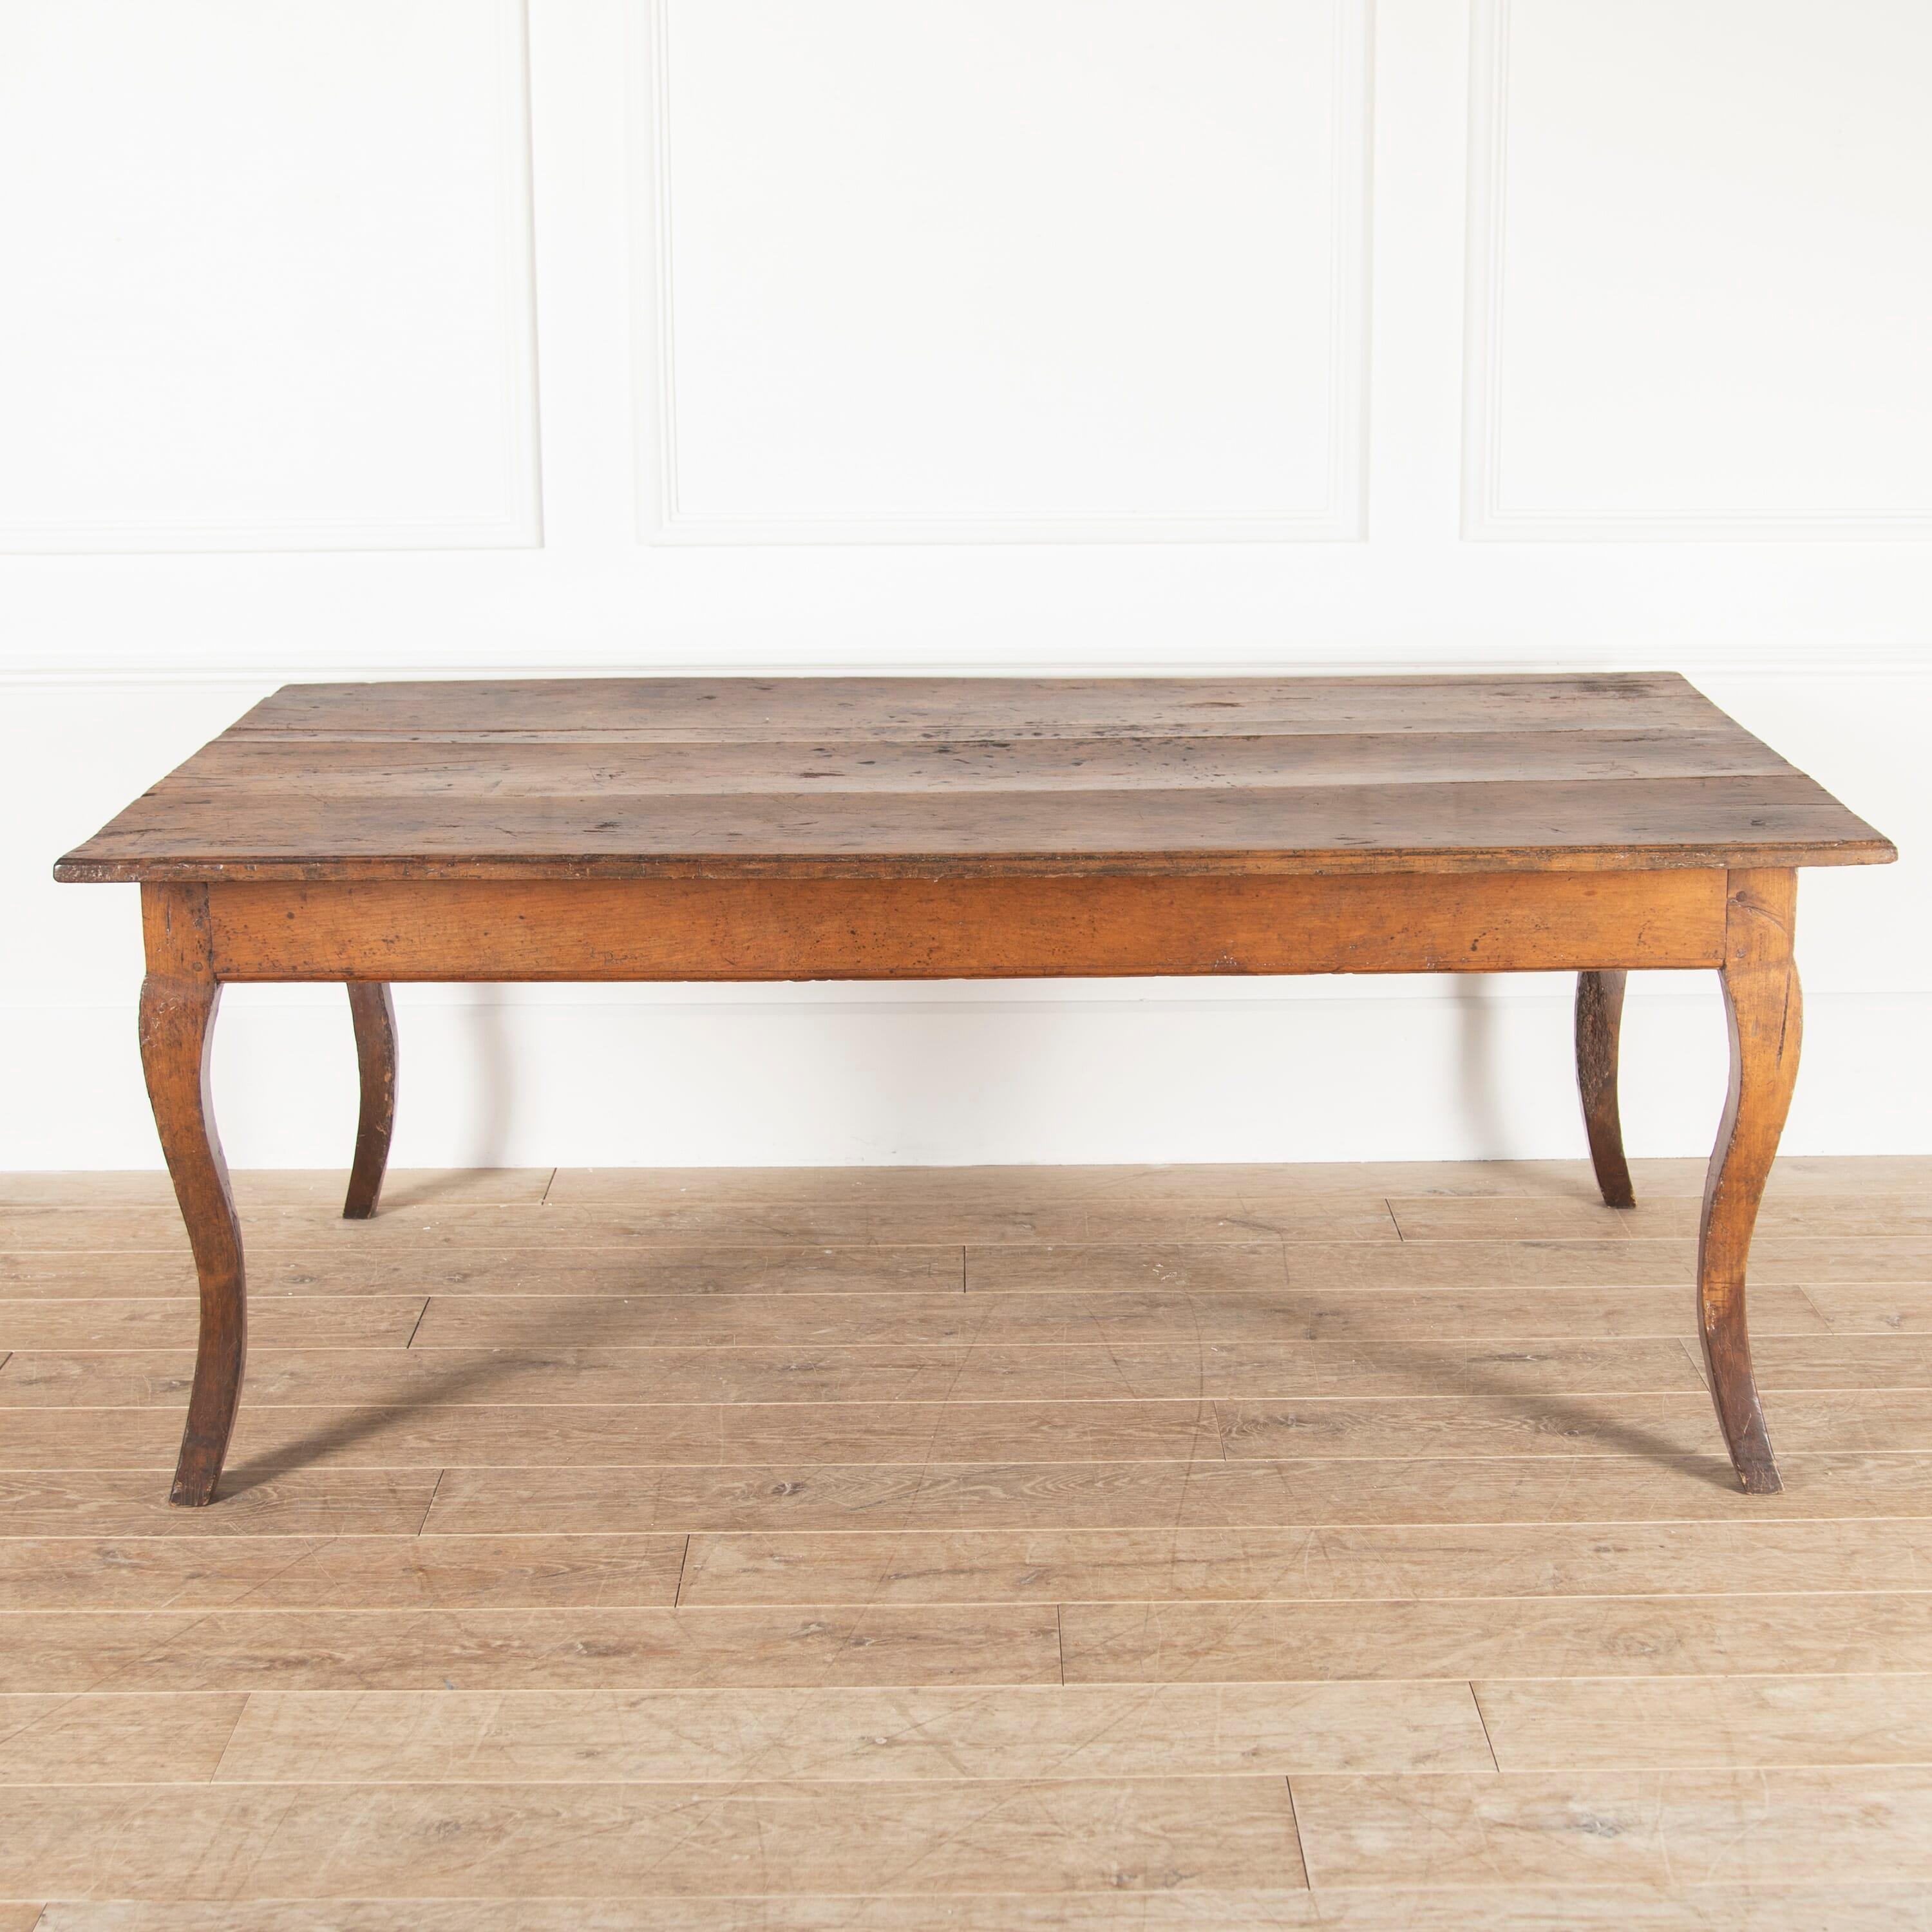 Exceptional mid 18th century French farmhouse table. Circa 1770. 

This chestnut table rests on elegant well-swept cabriole legs and offers a single drawer. 

Measuring 110cm (43